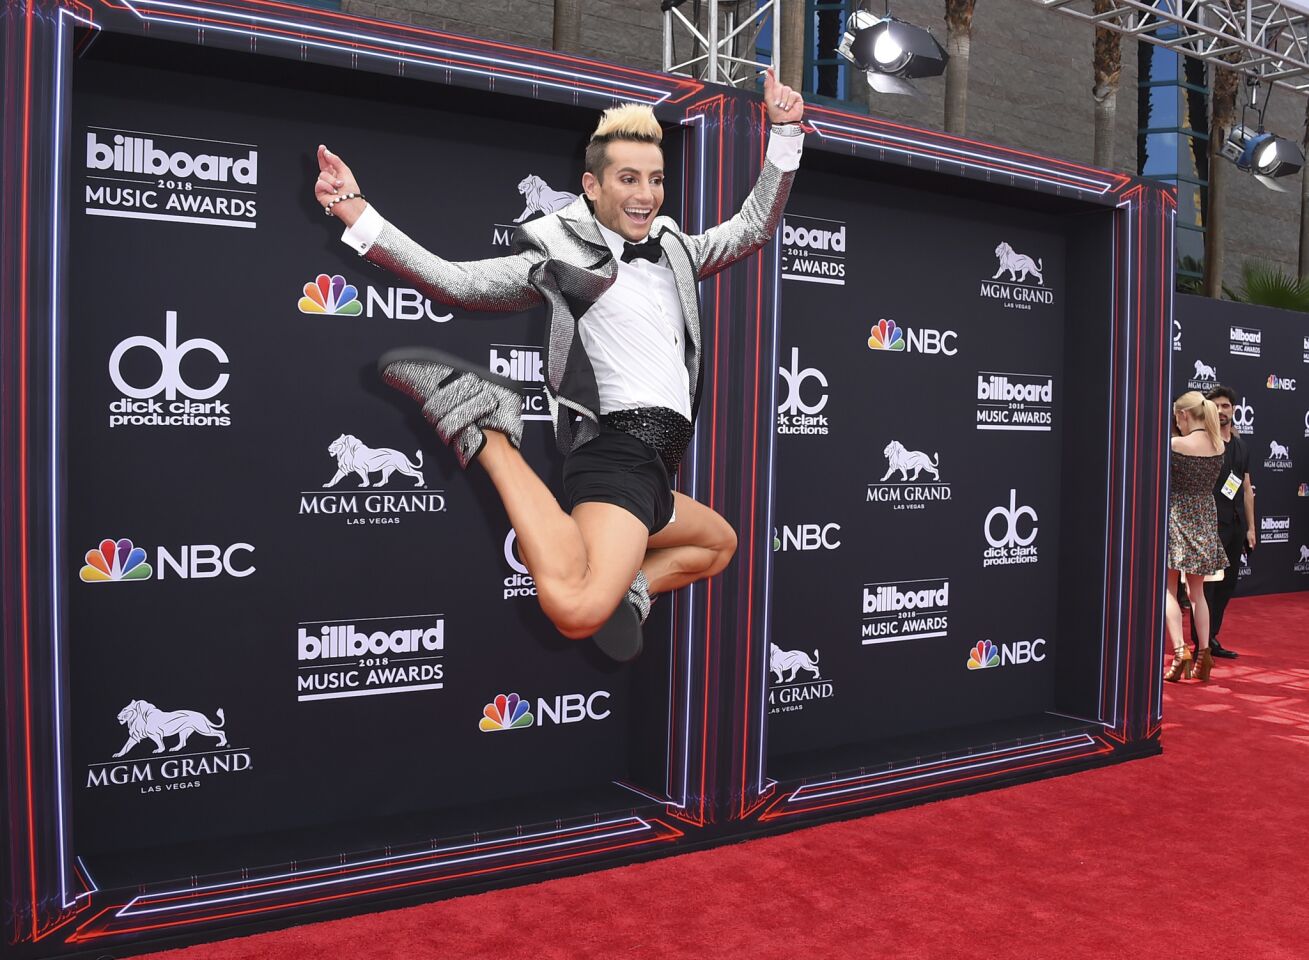 Frankie Grande, TV host and brother of Ariana, arrives at the Billboard Music Awards.